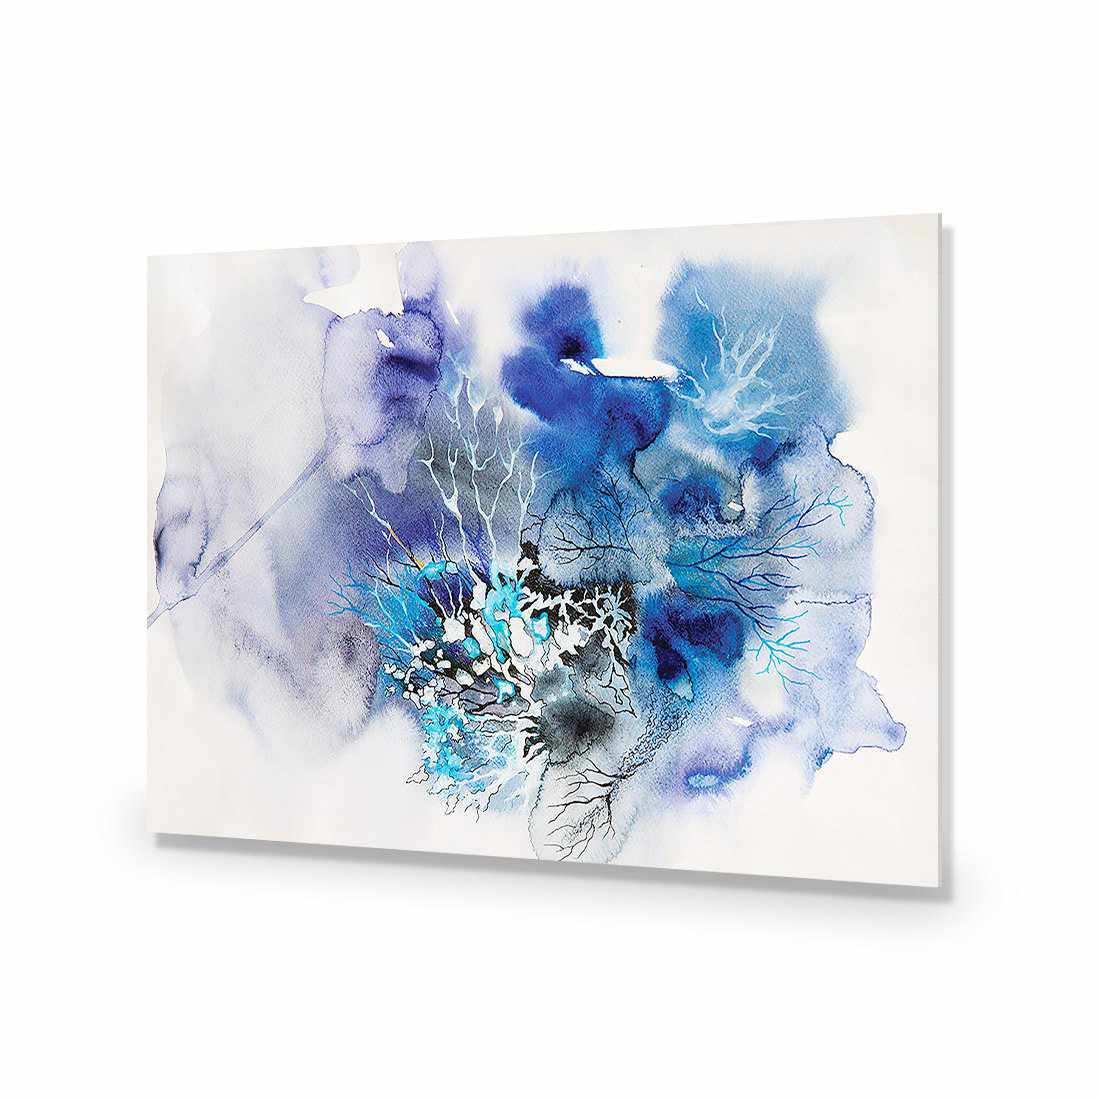 Veins Of Life, Blue-Acrylic-Wall Art Design-Without Border-Acrylic - No Frame-45x30cm-Wall Art Designs